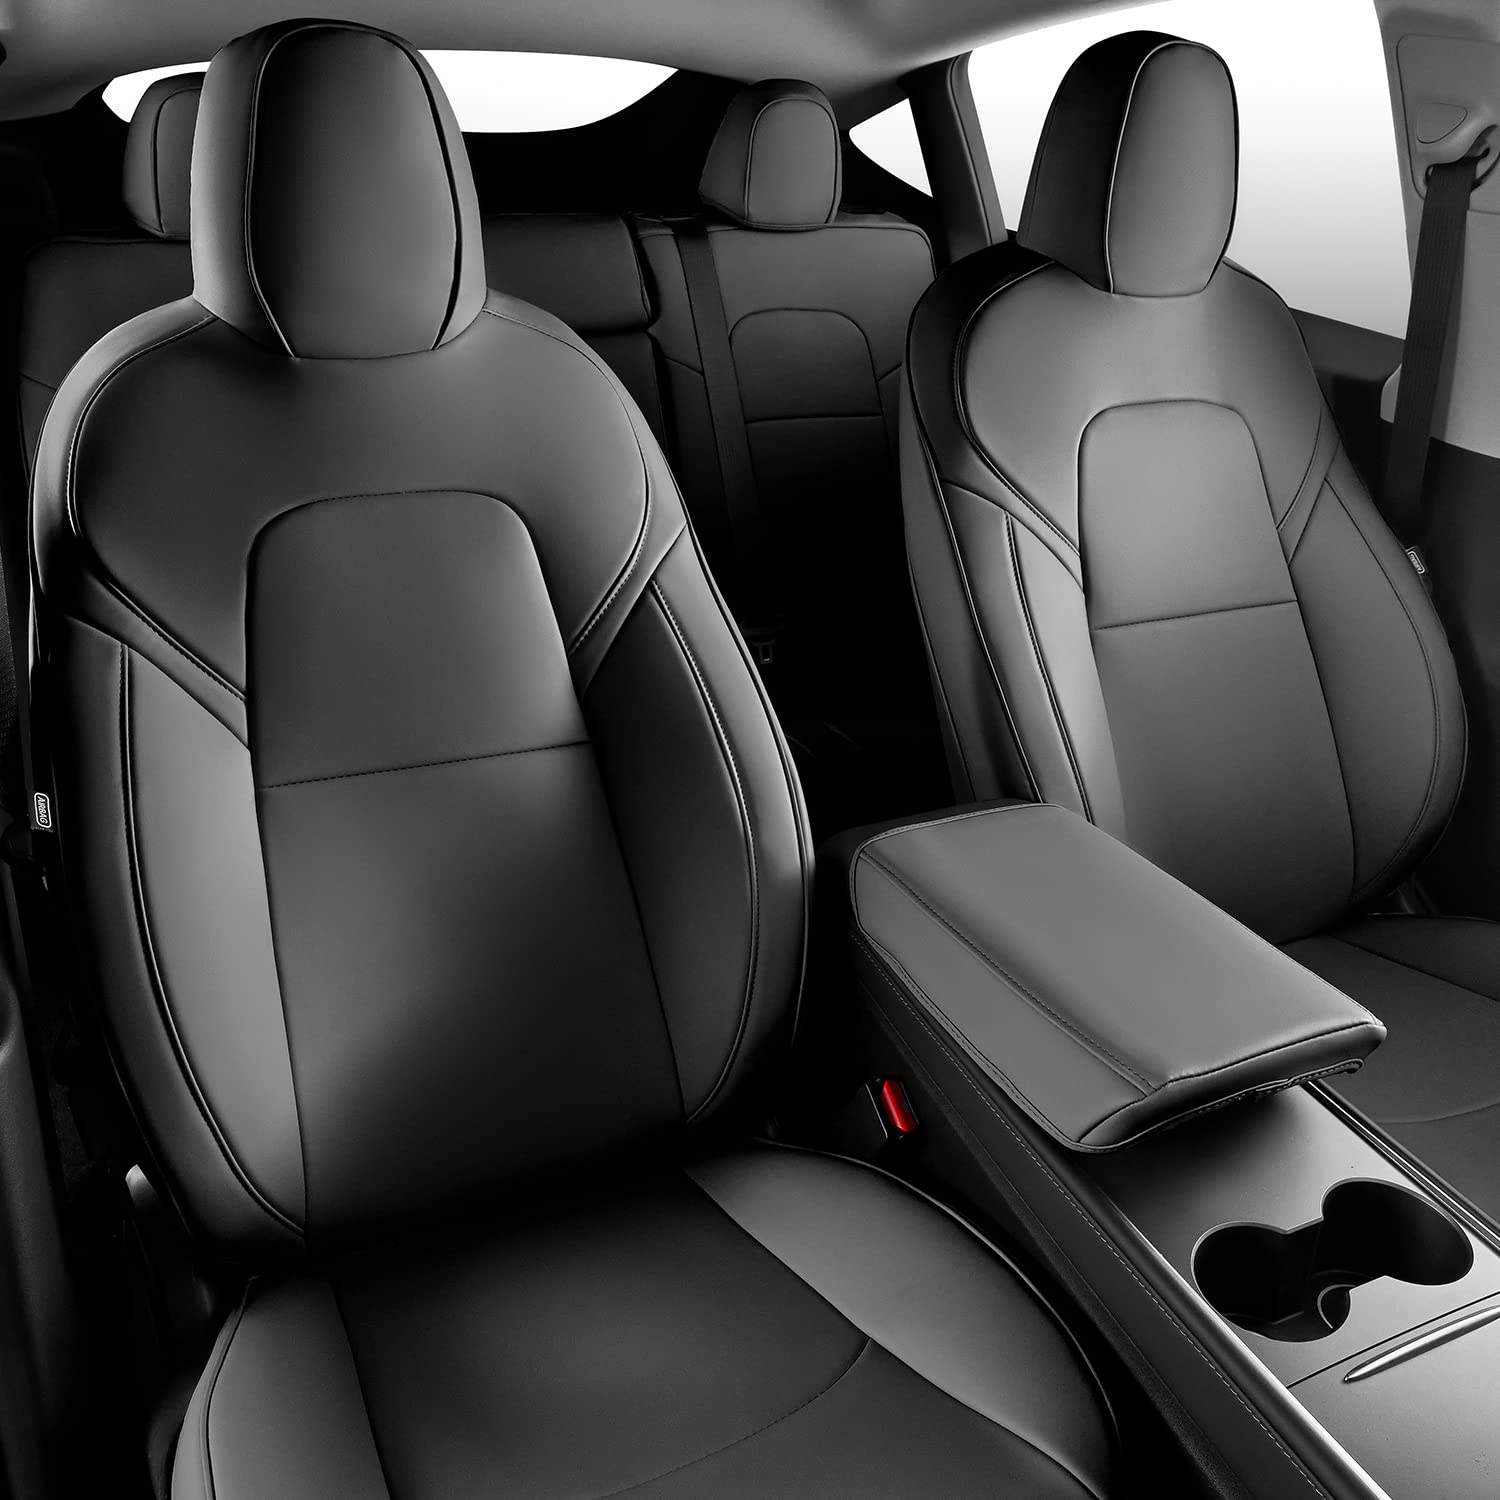 @UTOS Seat Covers Model 3/Y Leather Car Seat Covers, for 5 Seat Car Seat Cover Interior Cover All Weather Protection